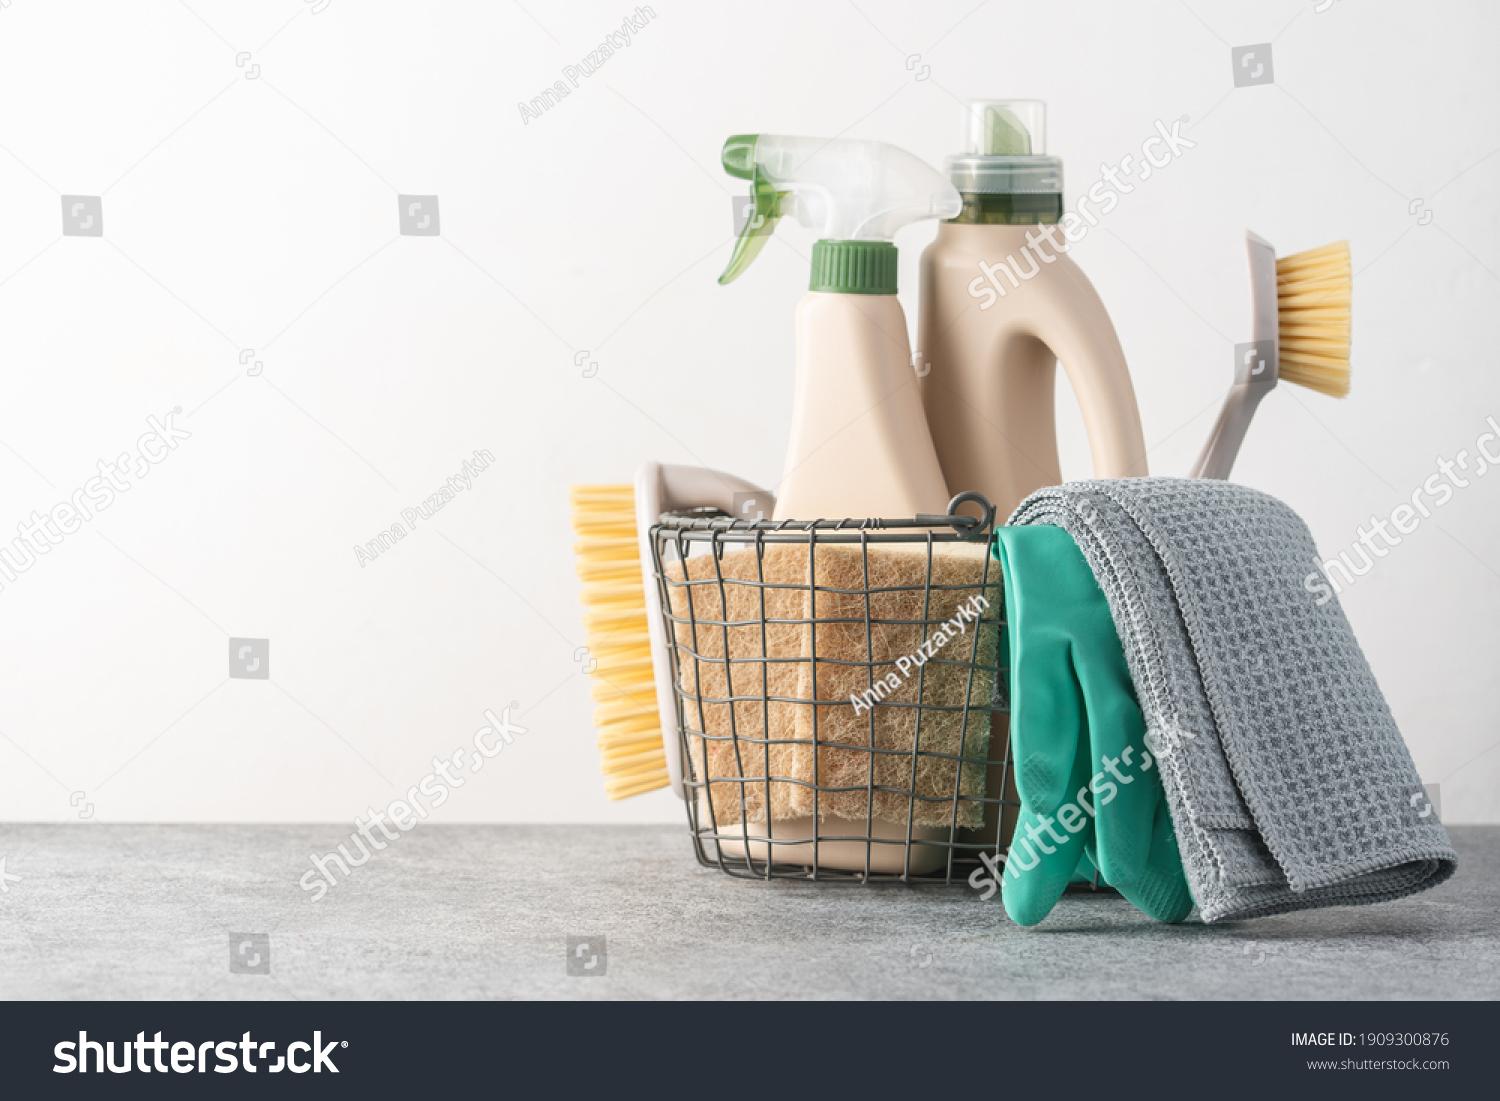 Brushes, sponges, rubber gloves and natural cleaning products in the basket.  Eco-friendly cleaning products #1909300876